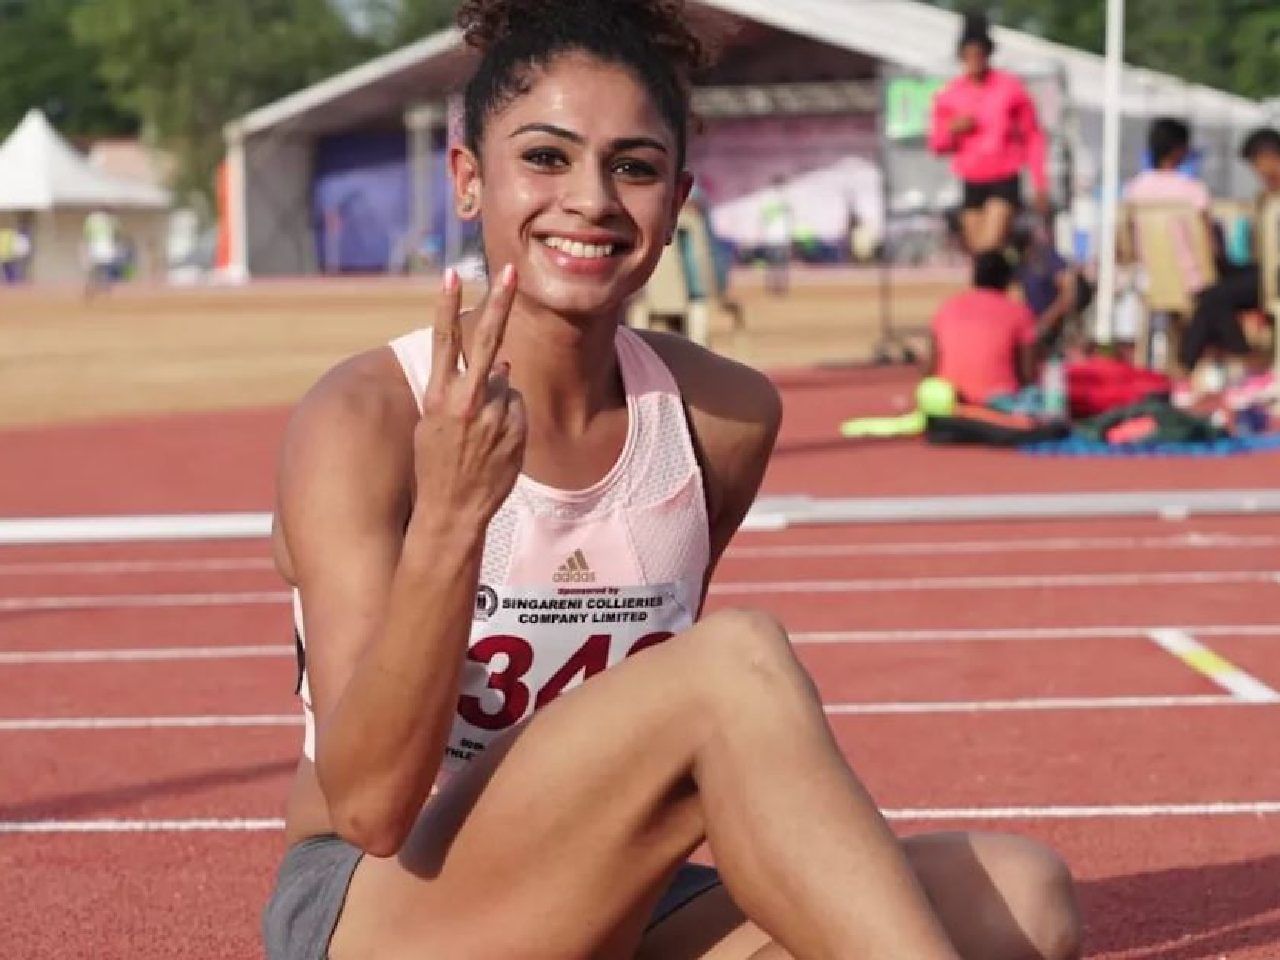 Harmilan Bains: 1500-metre National champion who ran her first race in the womb of her mother